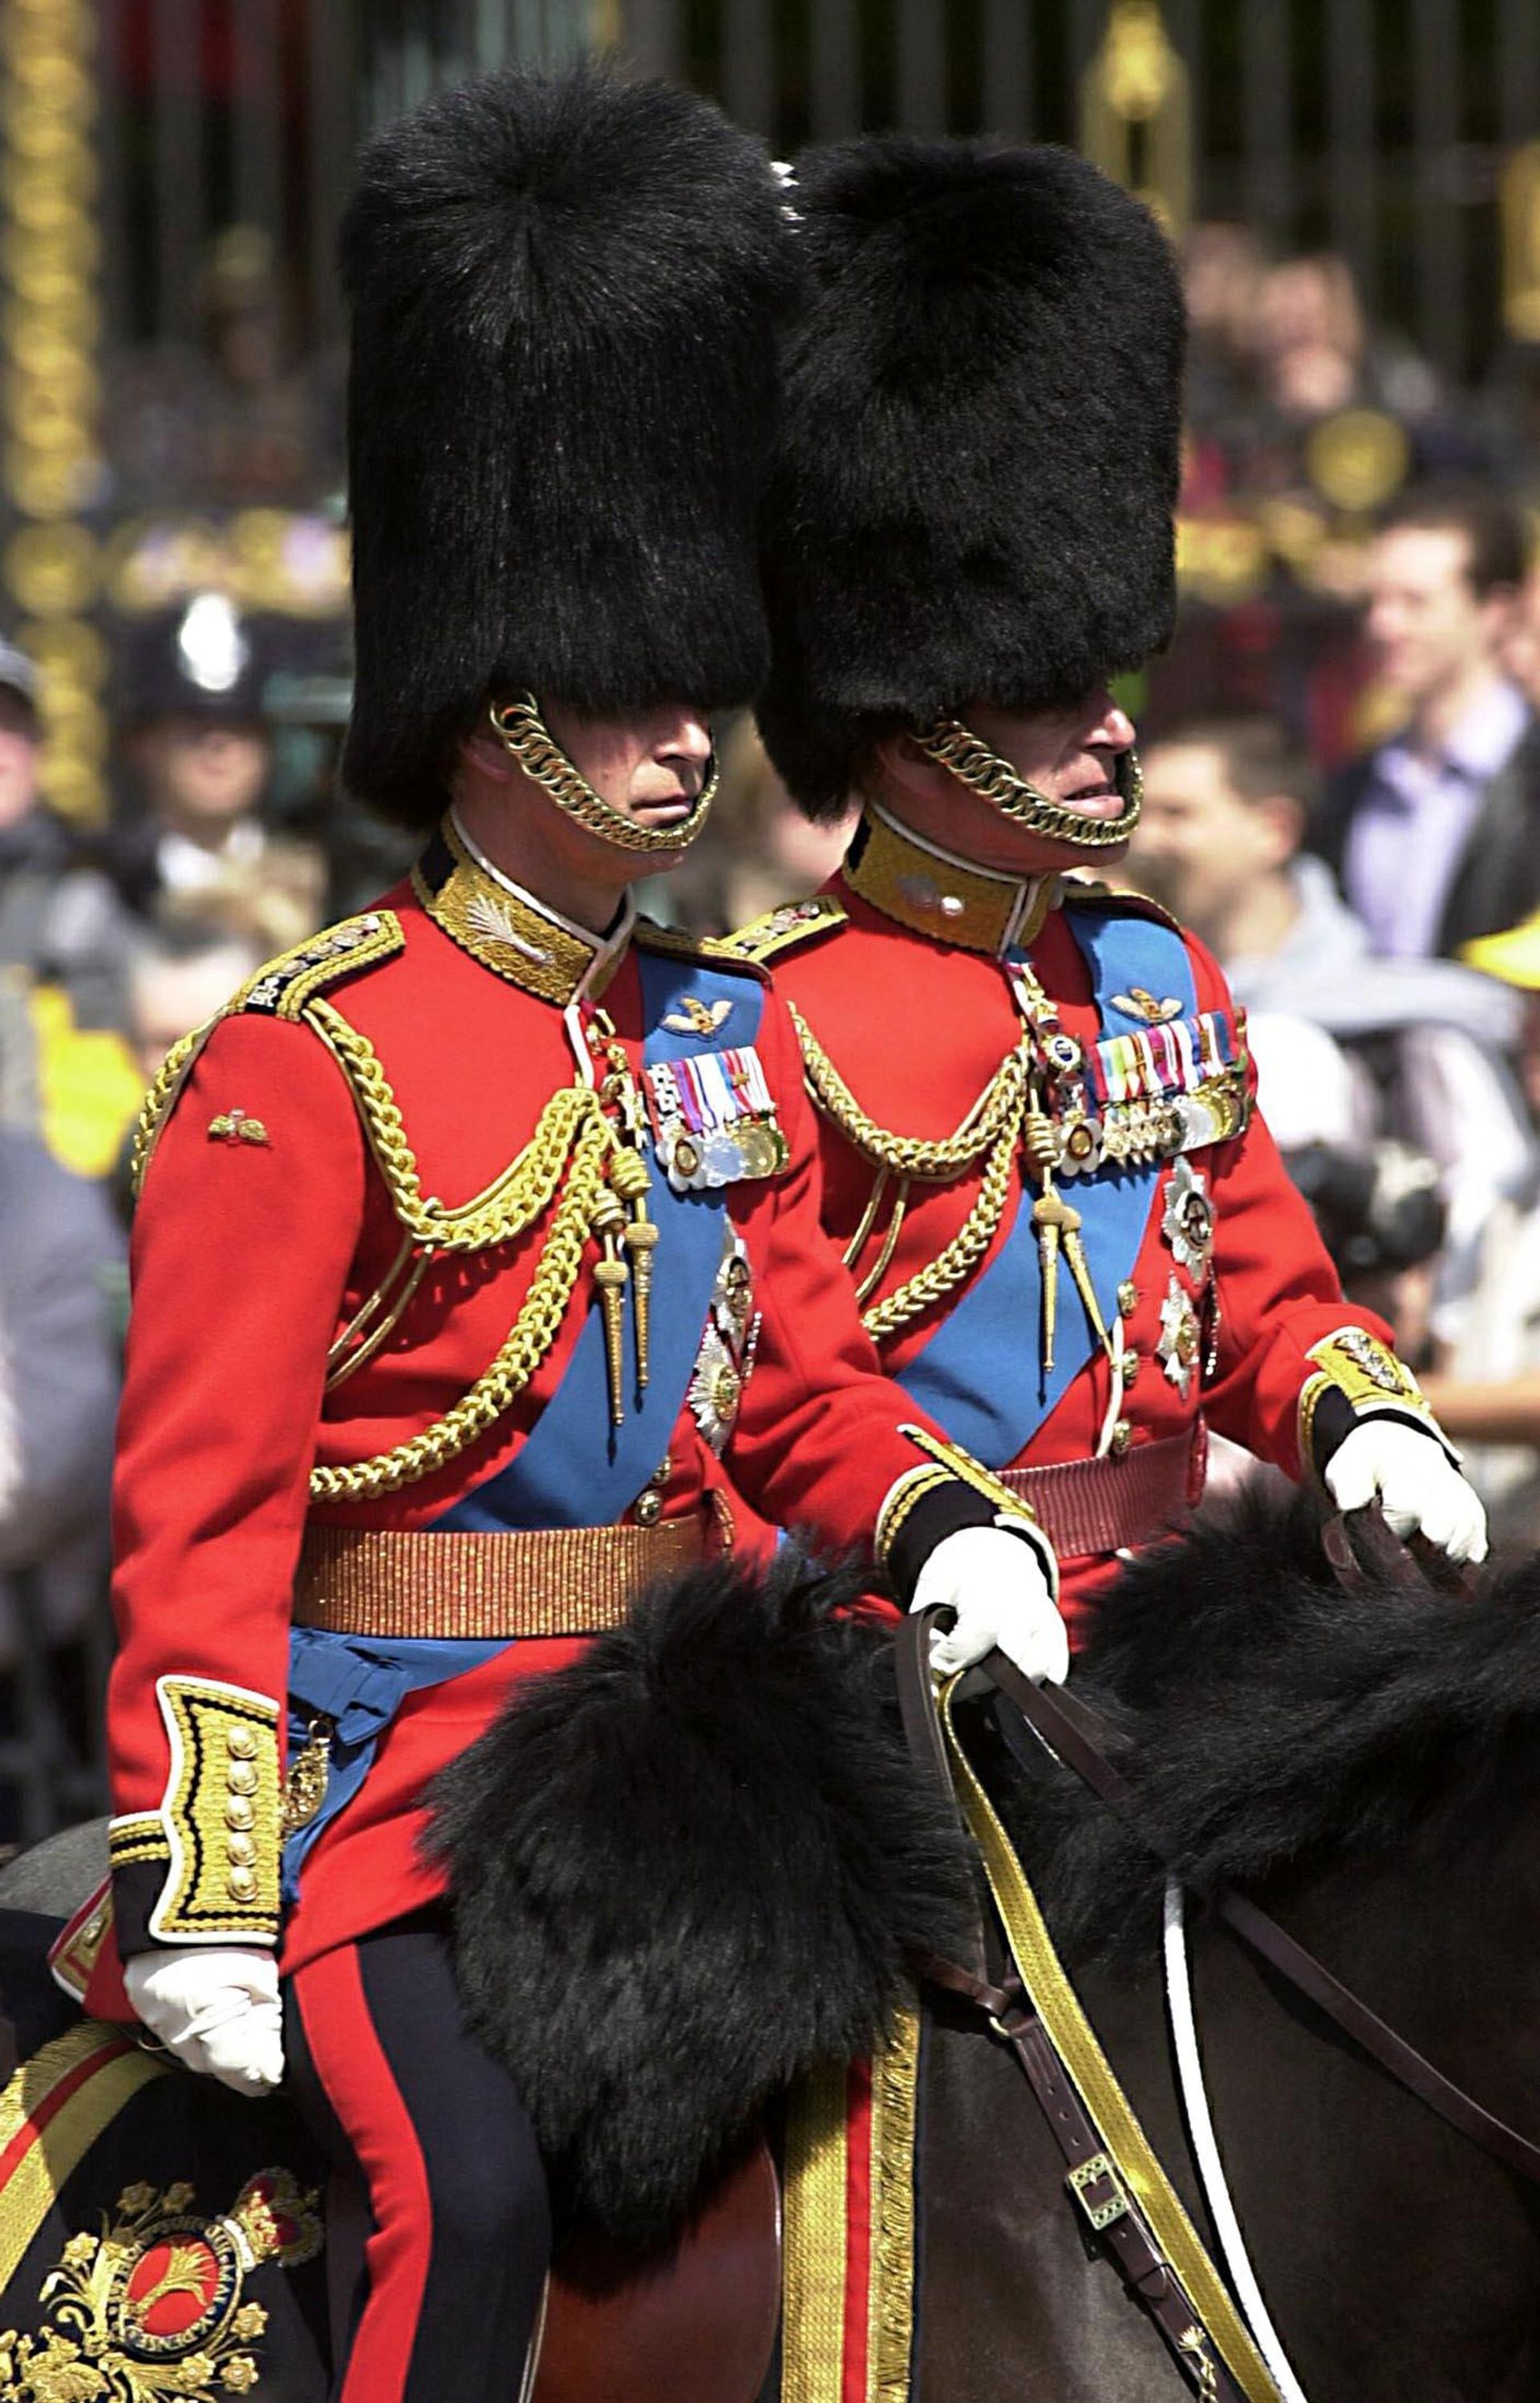 Charles en Philip trooping the colour